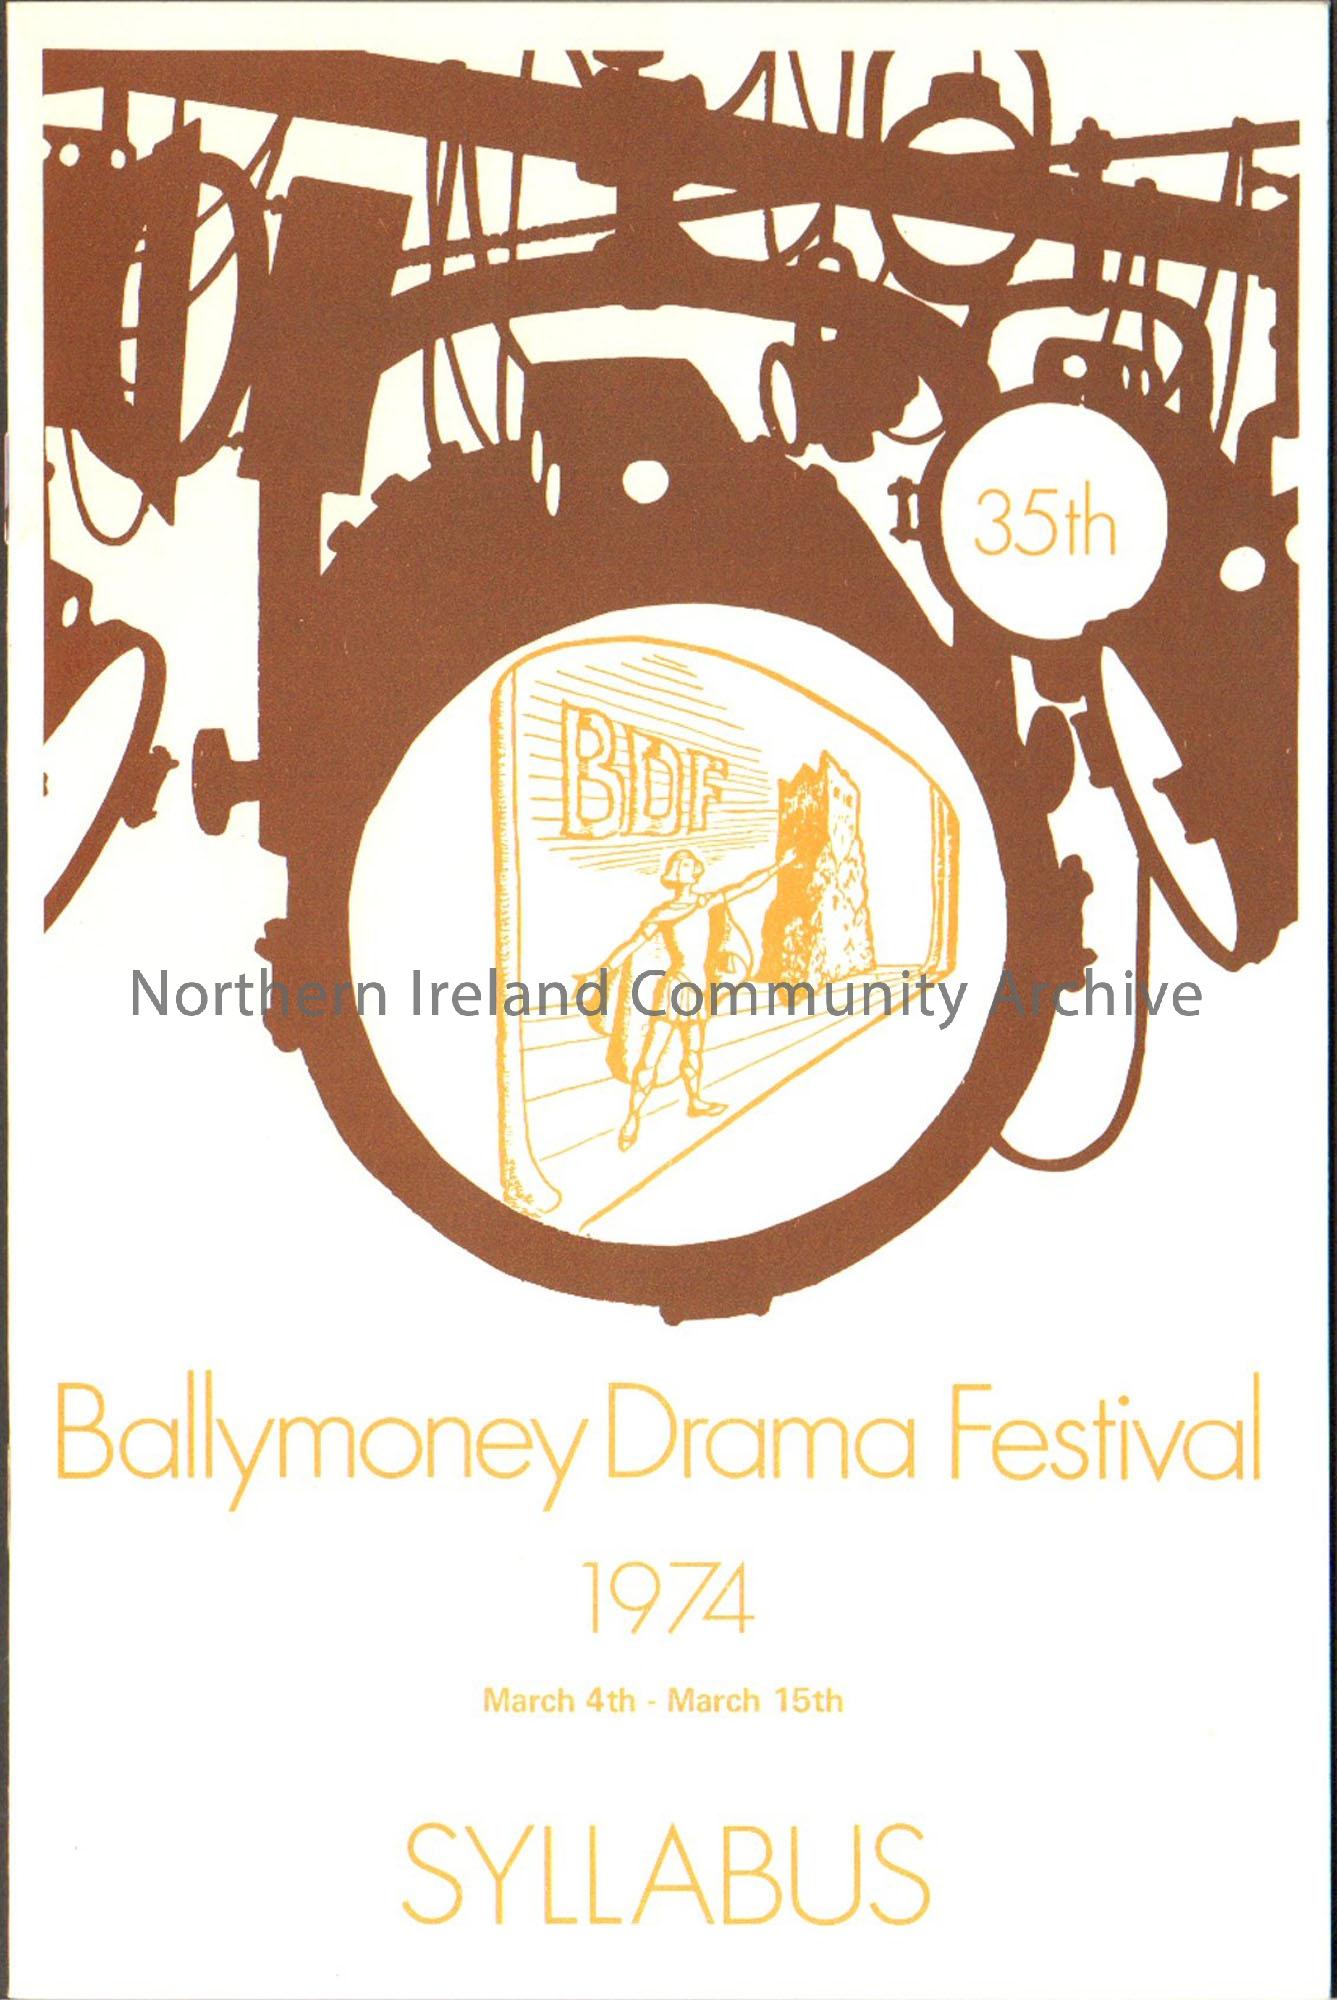 Ballymoney Drama Festival Syllabus for 1974. White cover with orange writing with an image of someone on a stage in front of a tower inside a dark bro…